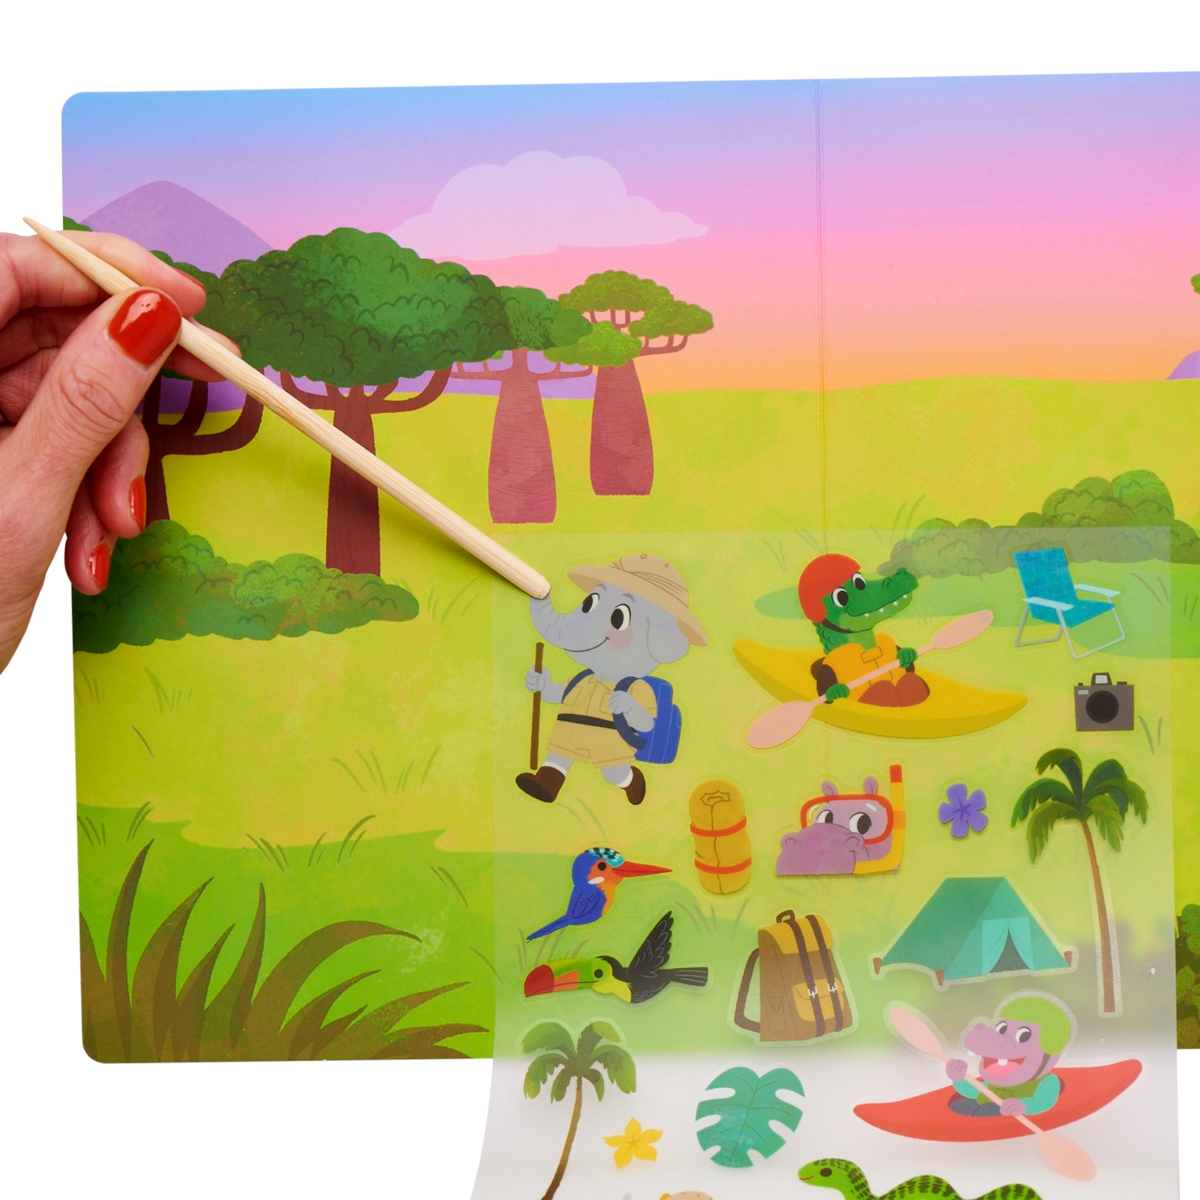 How To Draw A Jungle For Kids, Step by Step, Drawing Guide, by Dawn -  DragoArt